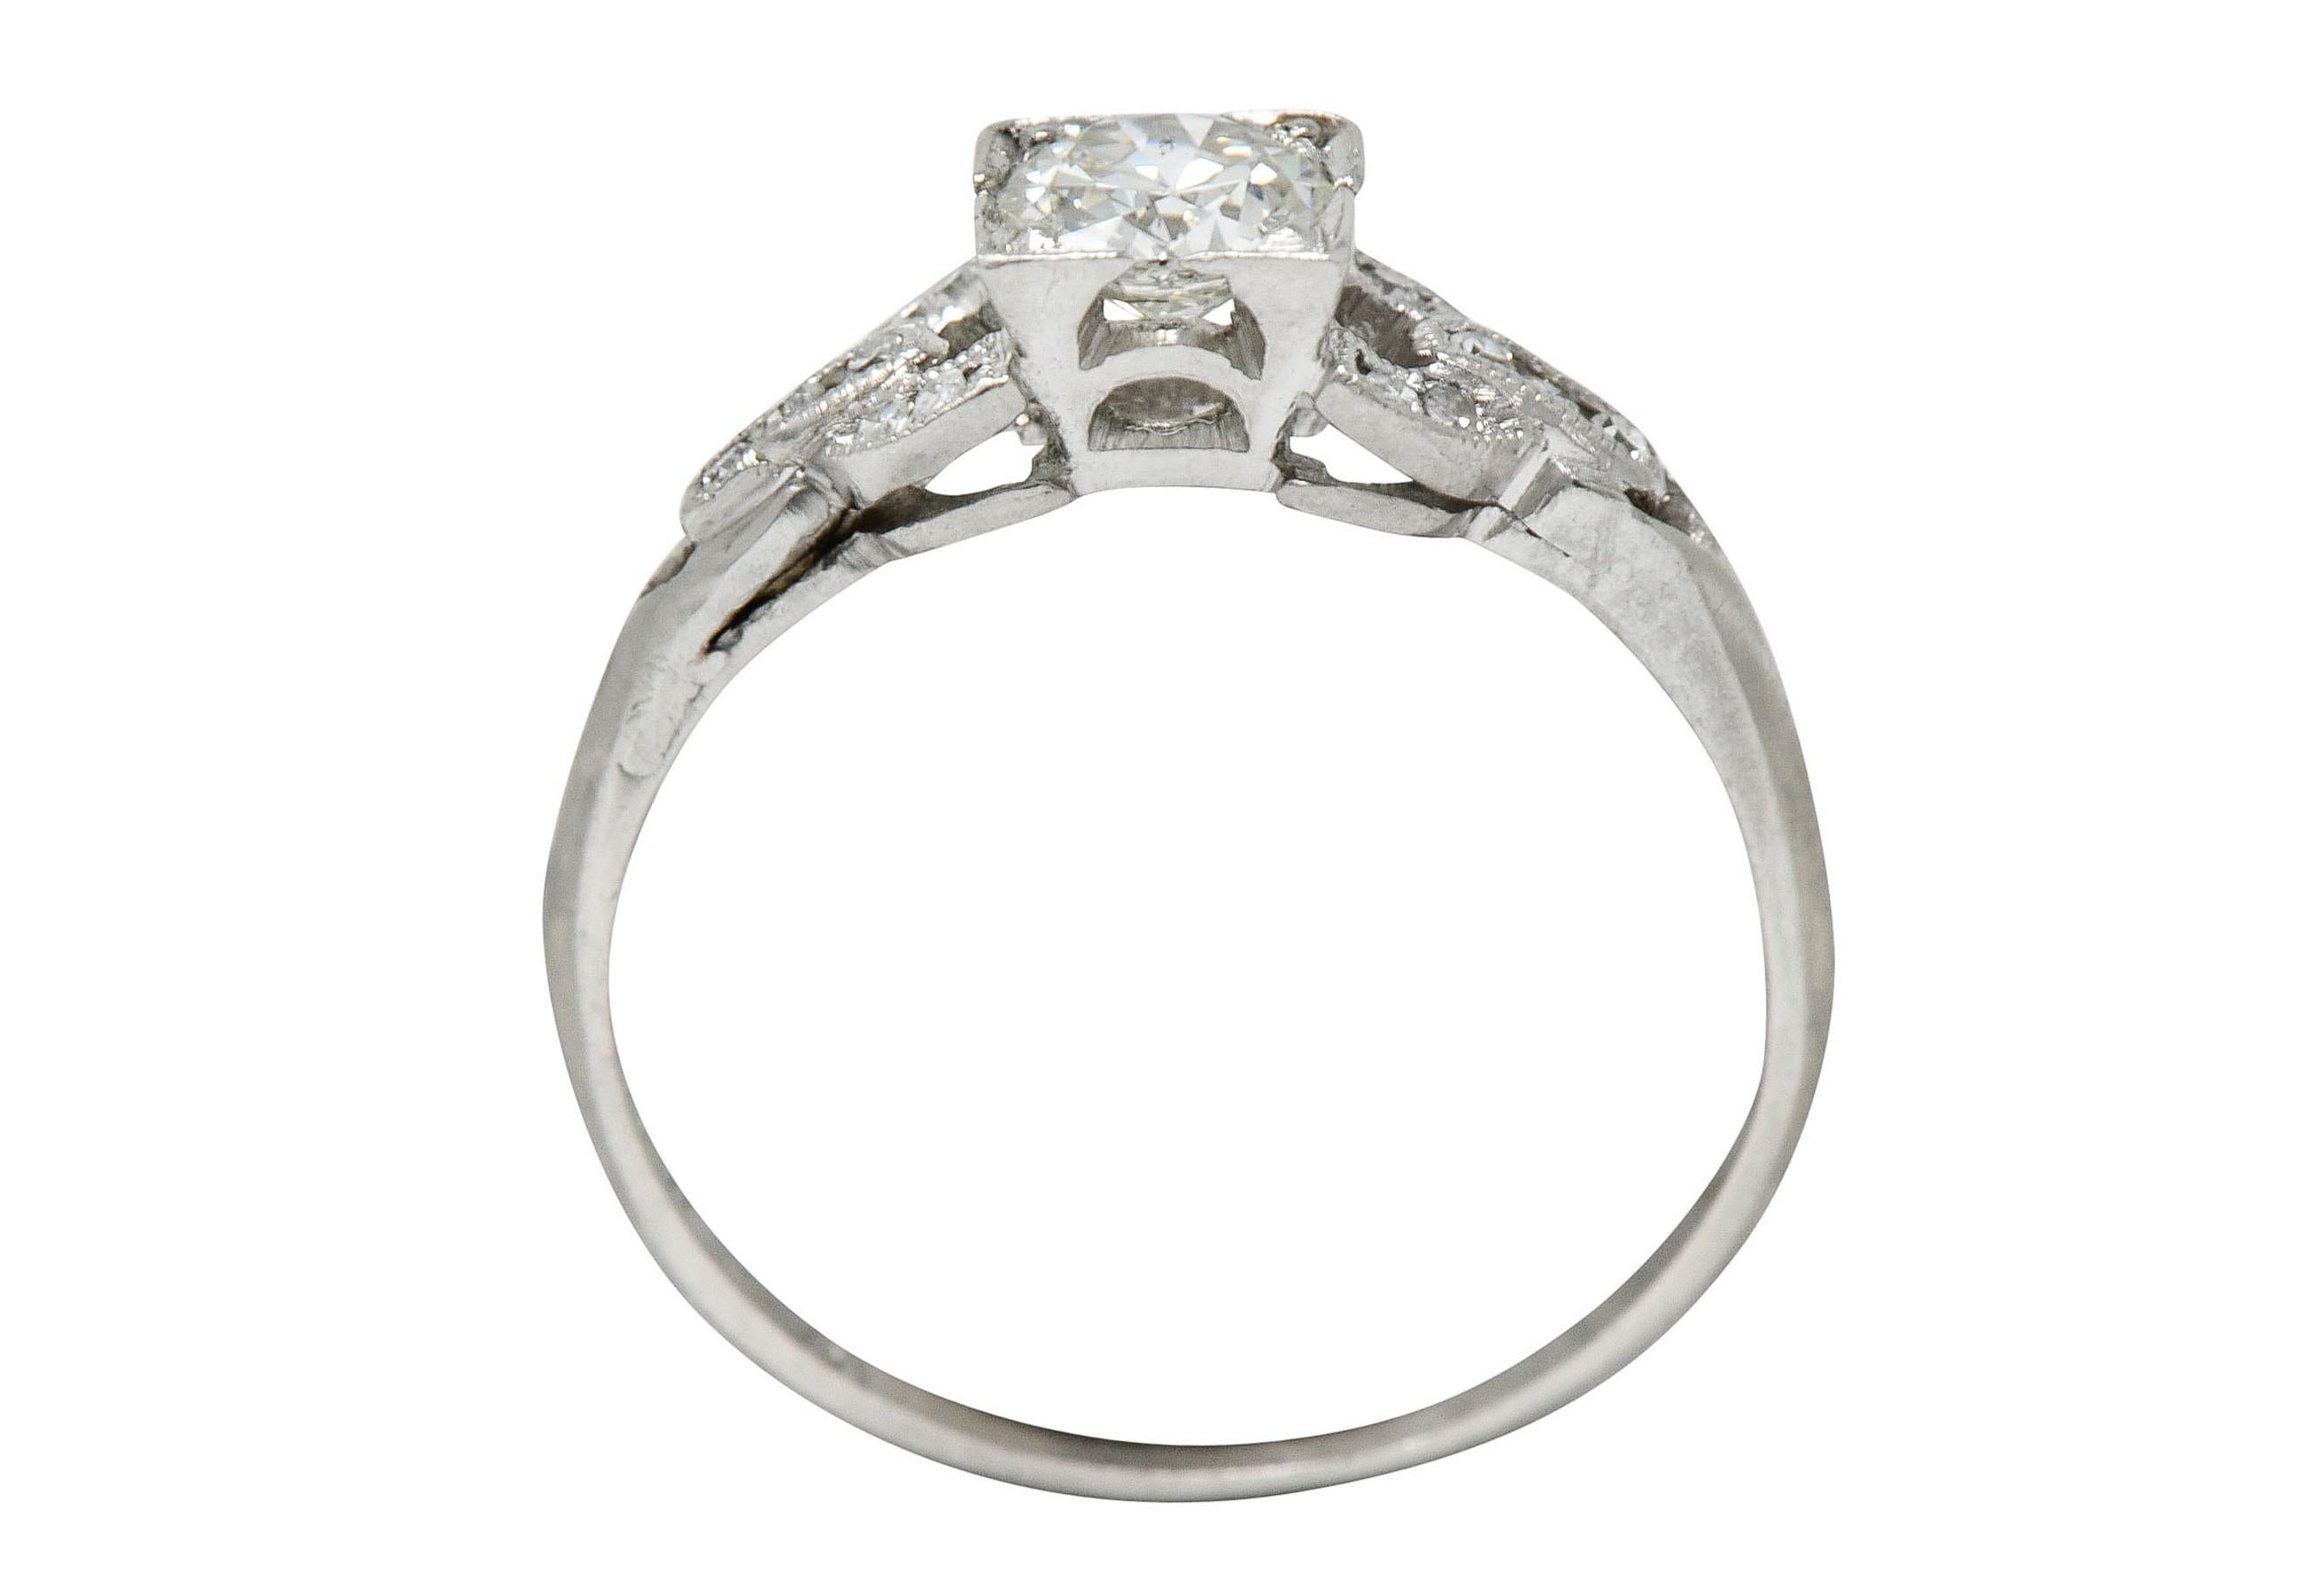 Centering a transitional cut diamond weighing approximately 0.35 carat - I color with SI clarity

Set in a square form and head and is flanked by buckle motif shoulders

Accented by single cut diamonds weighing in total approximately 0.18 carat -